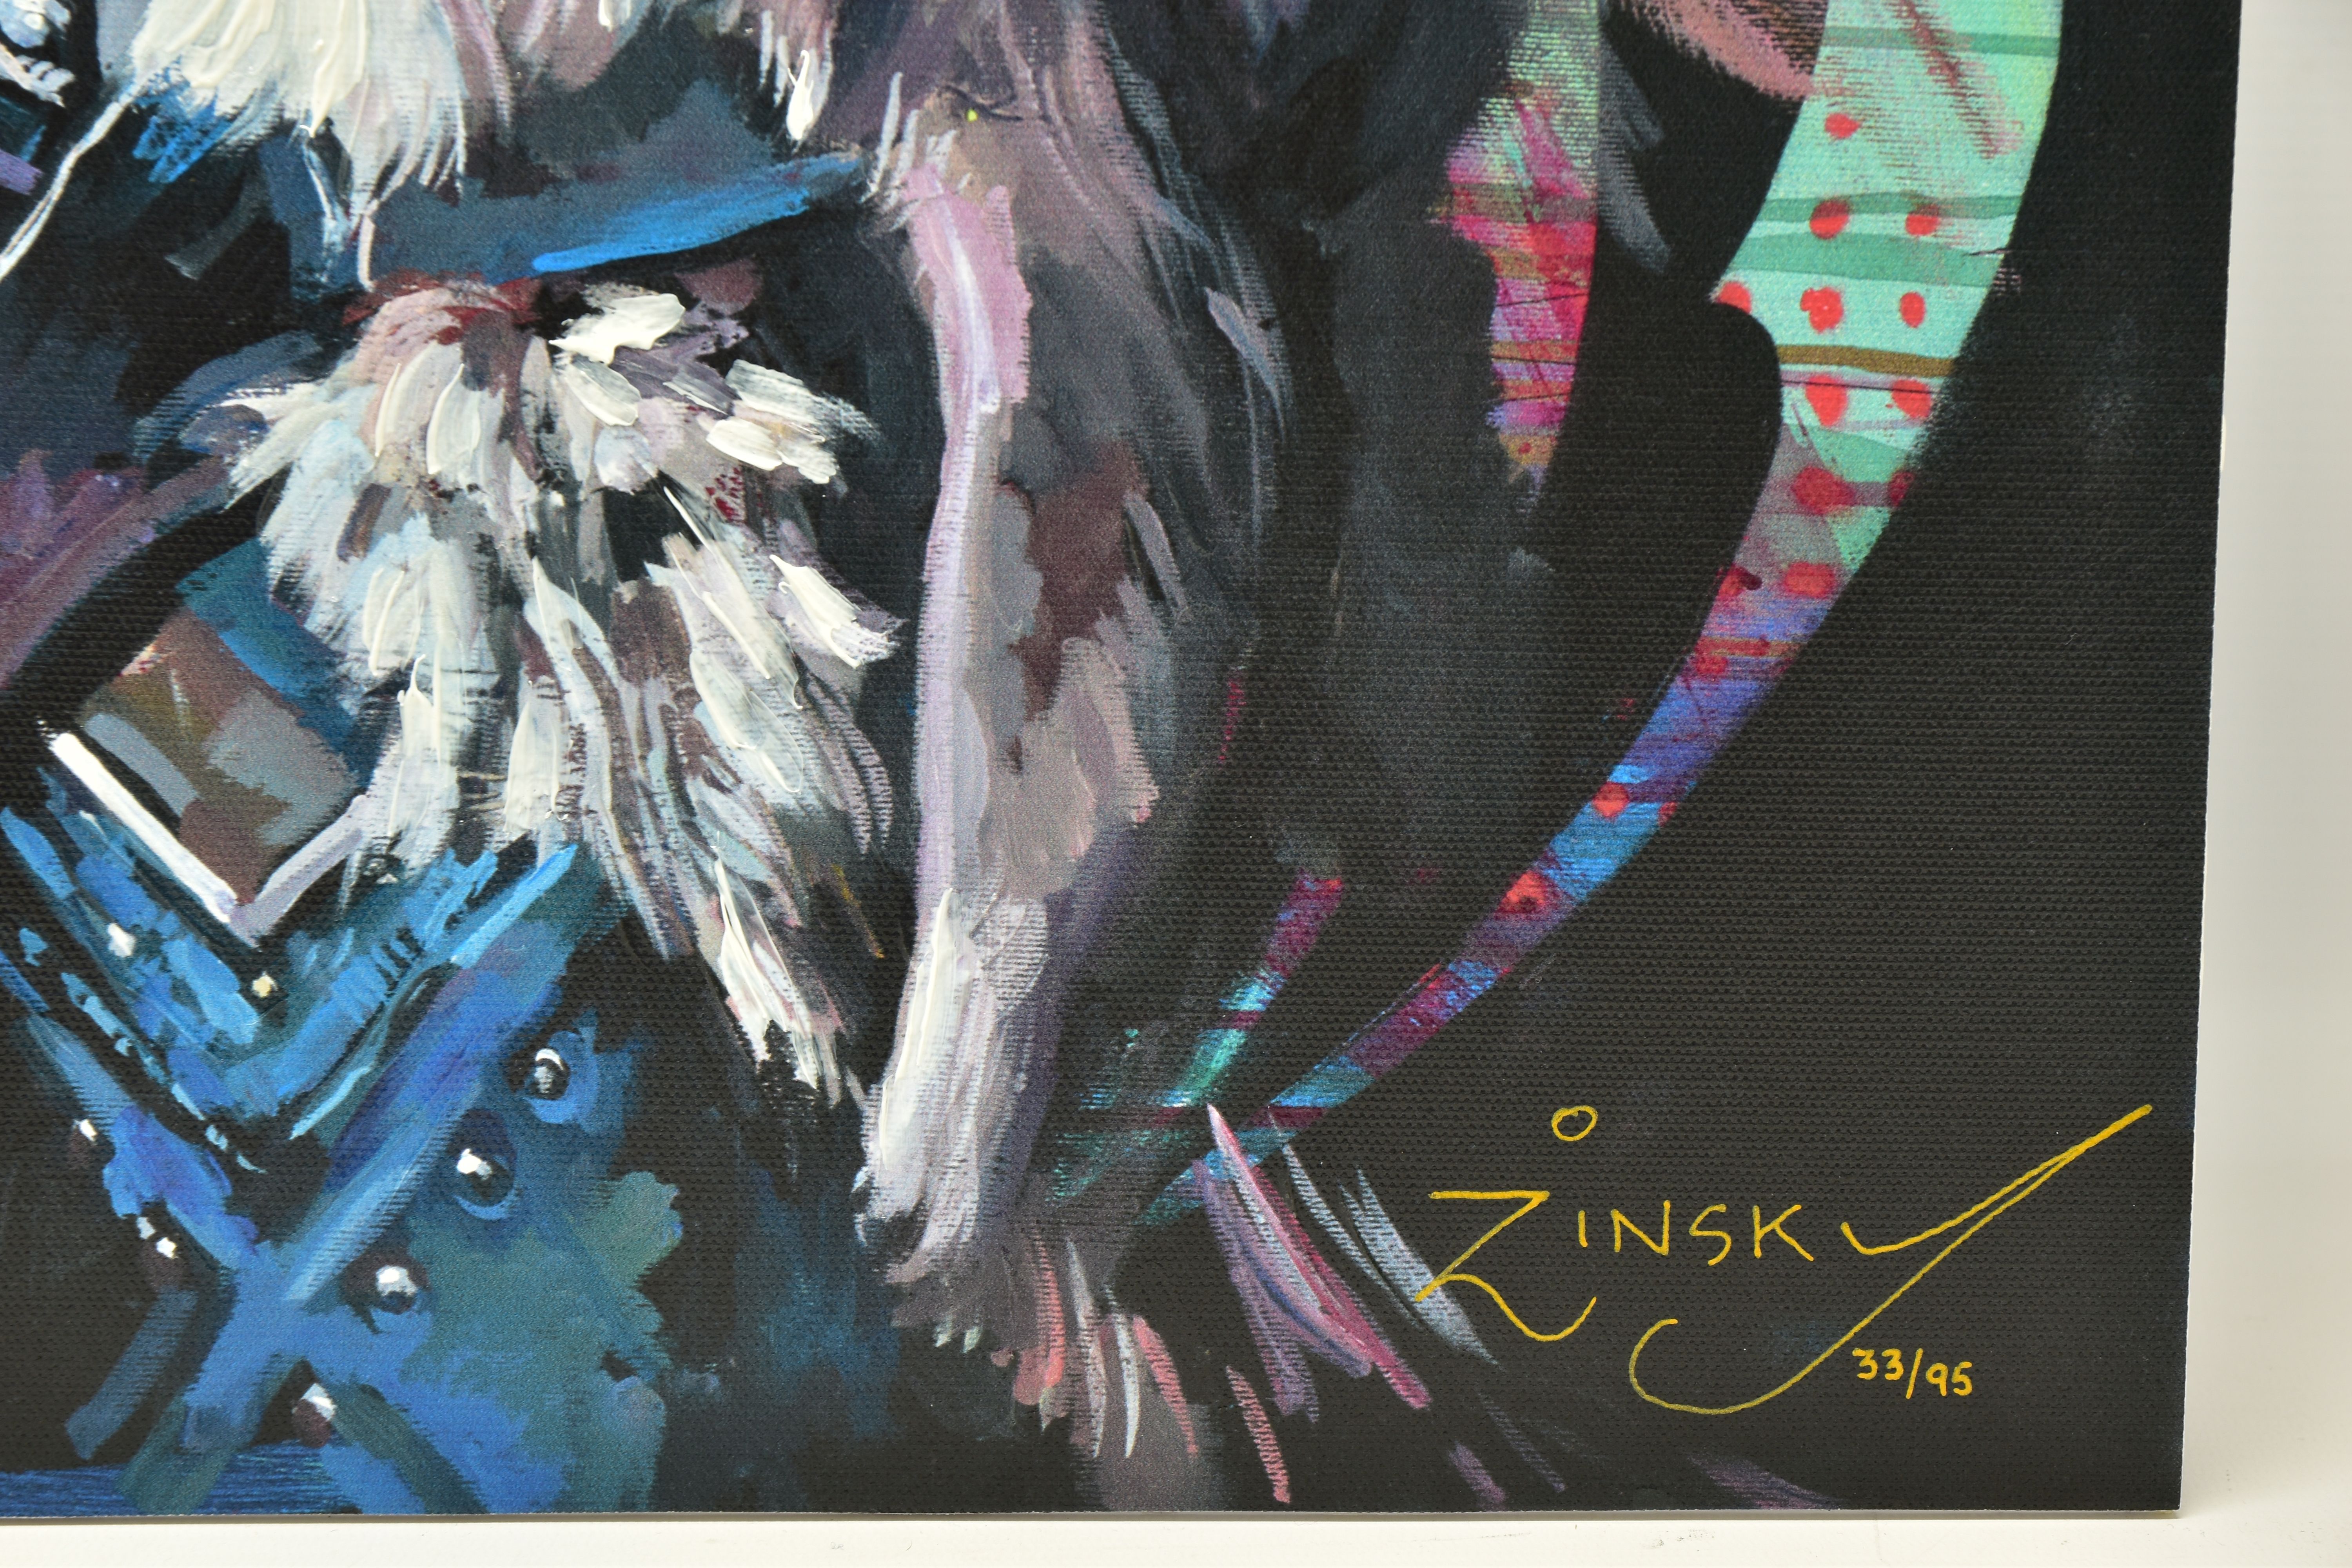 ZINSKY (BRITISH CONTEMPORARY) 'WINTER IS COMING', a signed limited edition print depicting a - Image 2 of 3